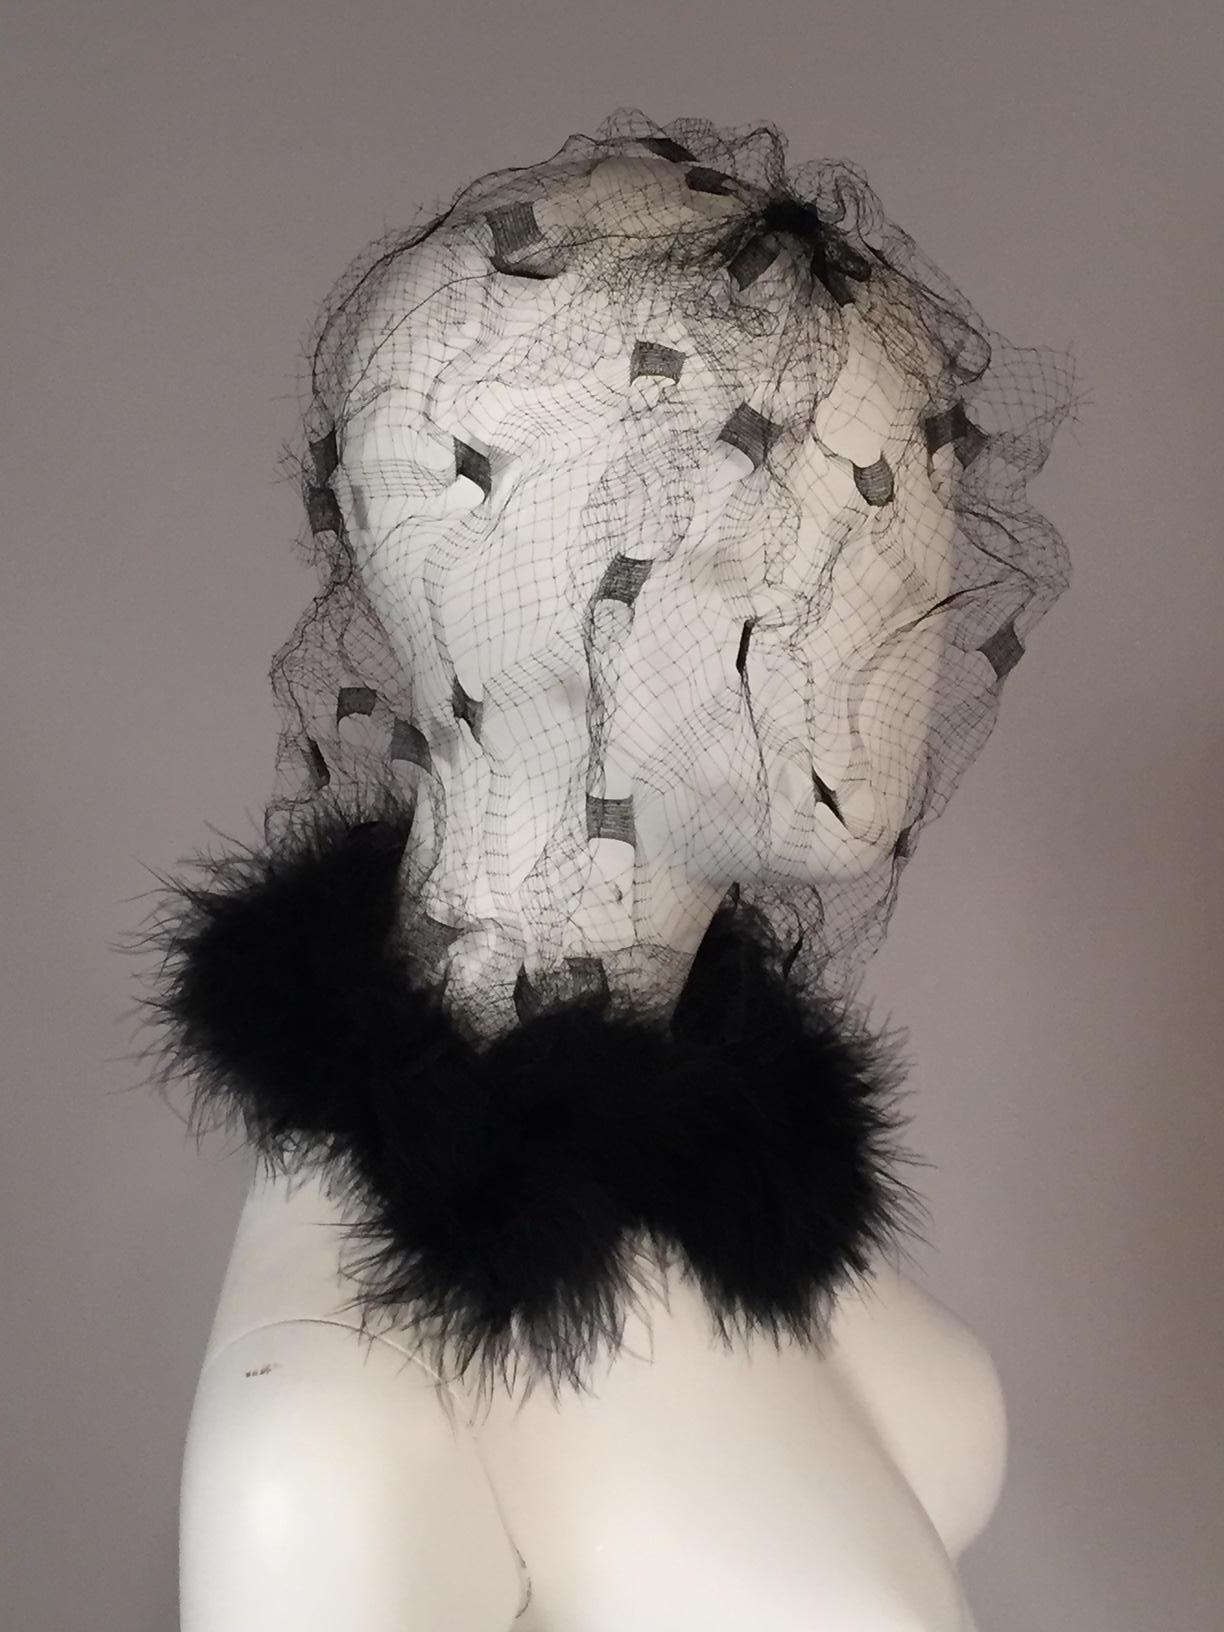 Perhaps you saw the Capsule Collection of William J. hats that I posted to 1stdibs in 2012. The whole collection of 22 hats were snapped up in an instant by the Metropolitan Museum of Art in NYC for the Costume Institute collection. William J. is